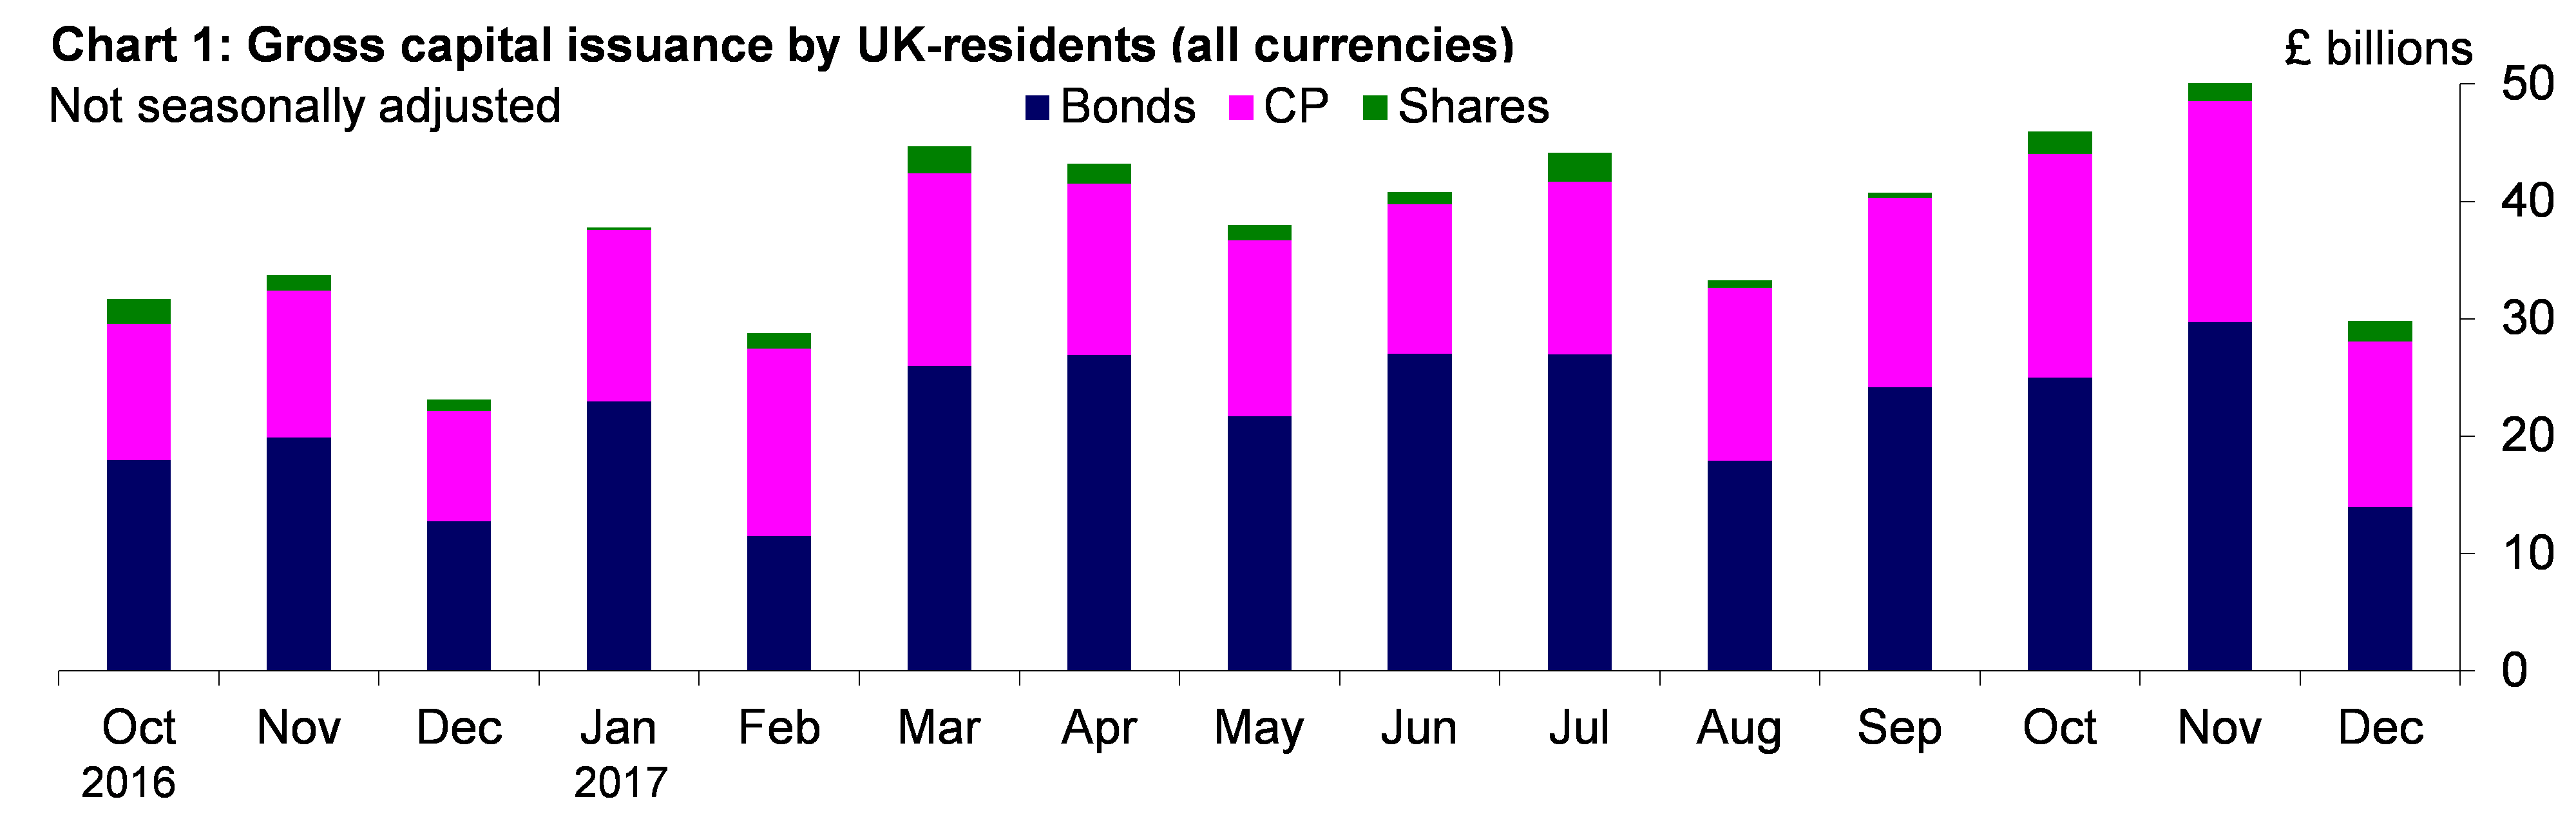 Chart 1: Gross capital issuance by UK-residents (all currencies)